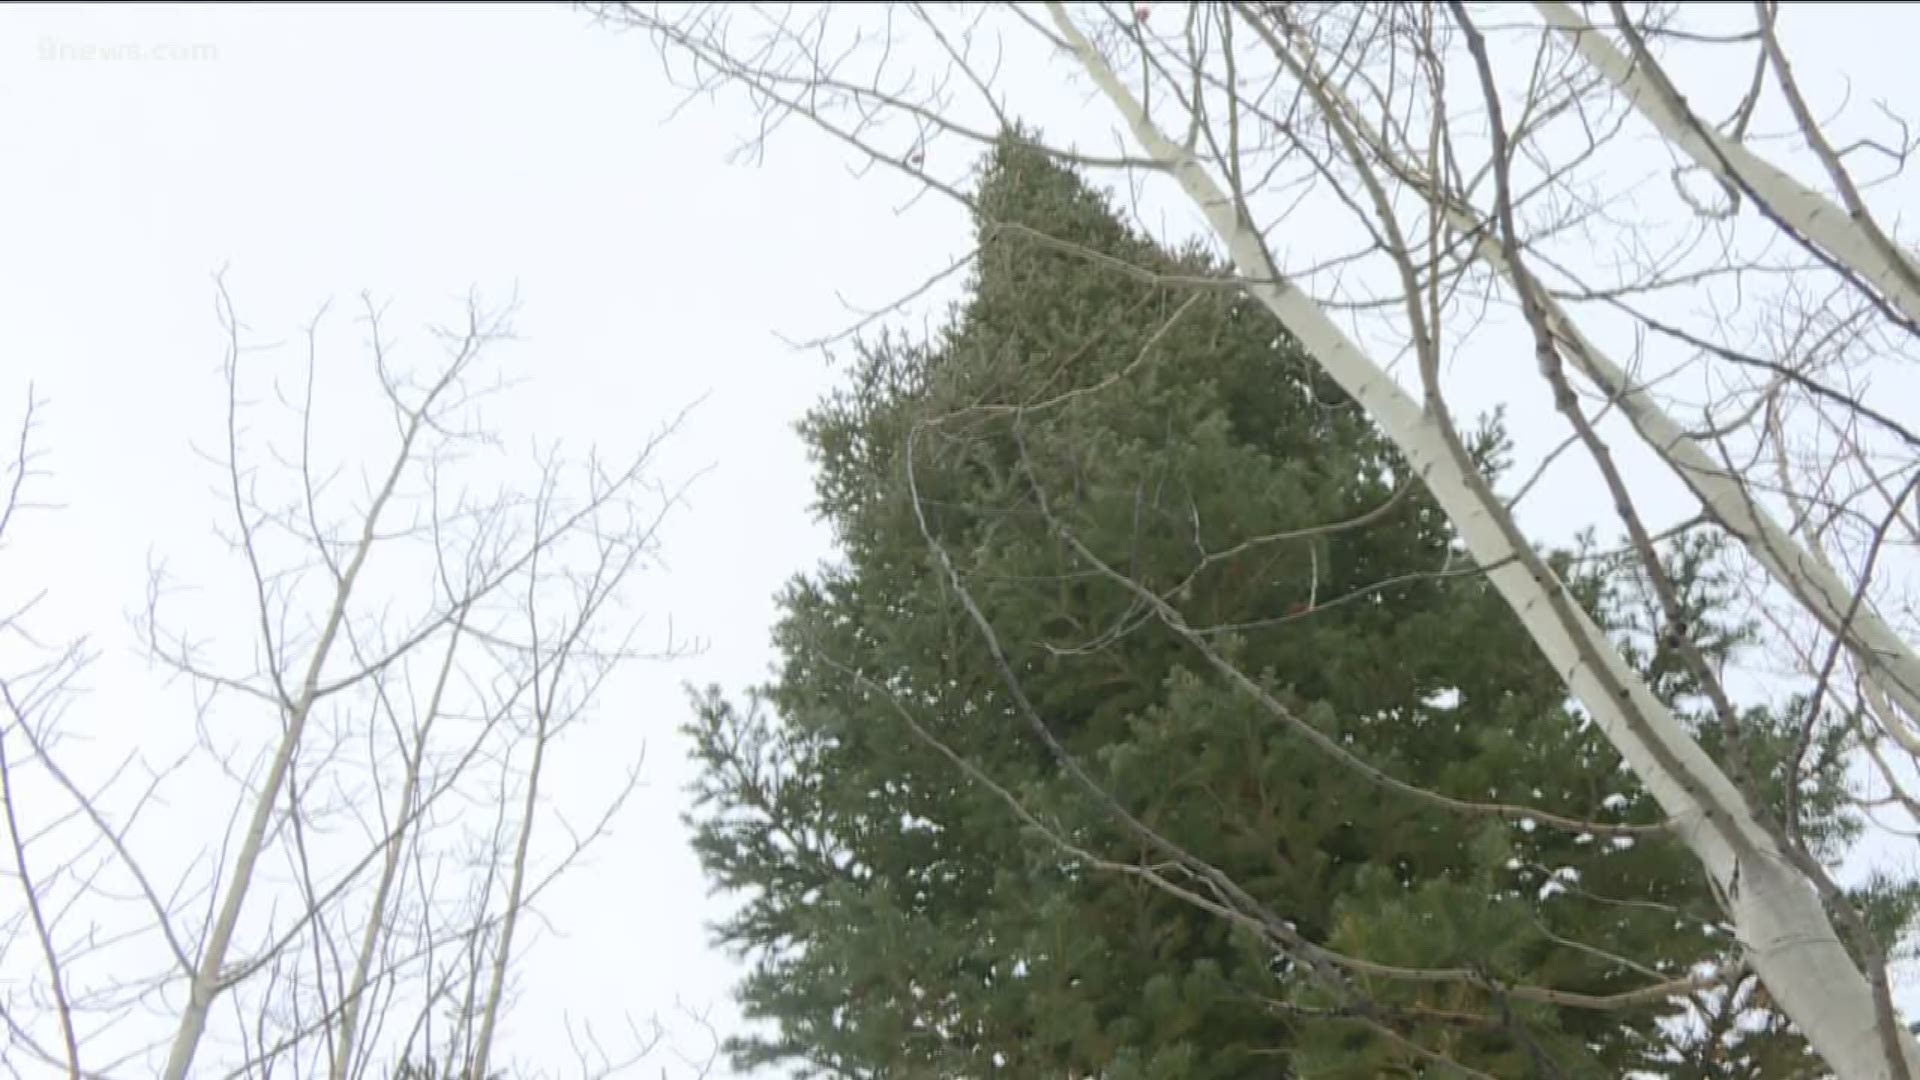 Mike Hughes cuts the two-and-a-half-story Christmas tree down and delivers it to the capitol in Denver every year.